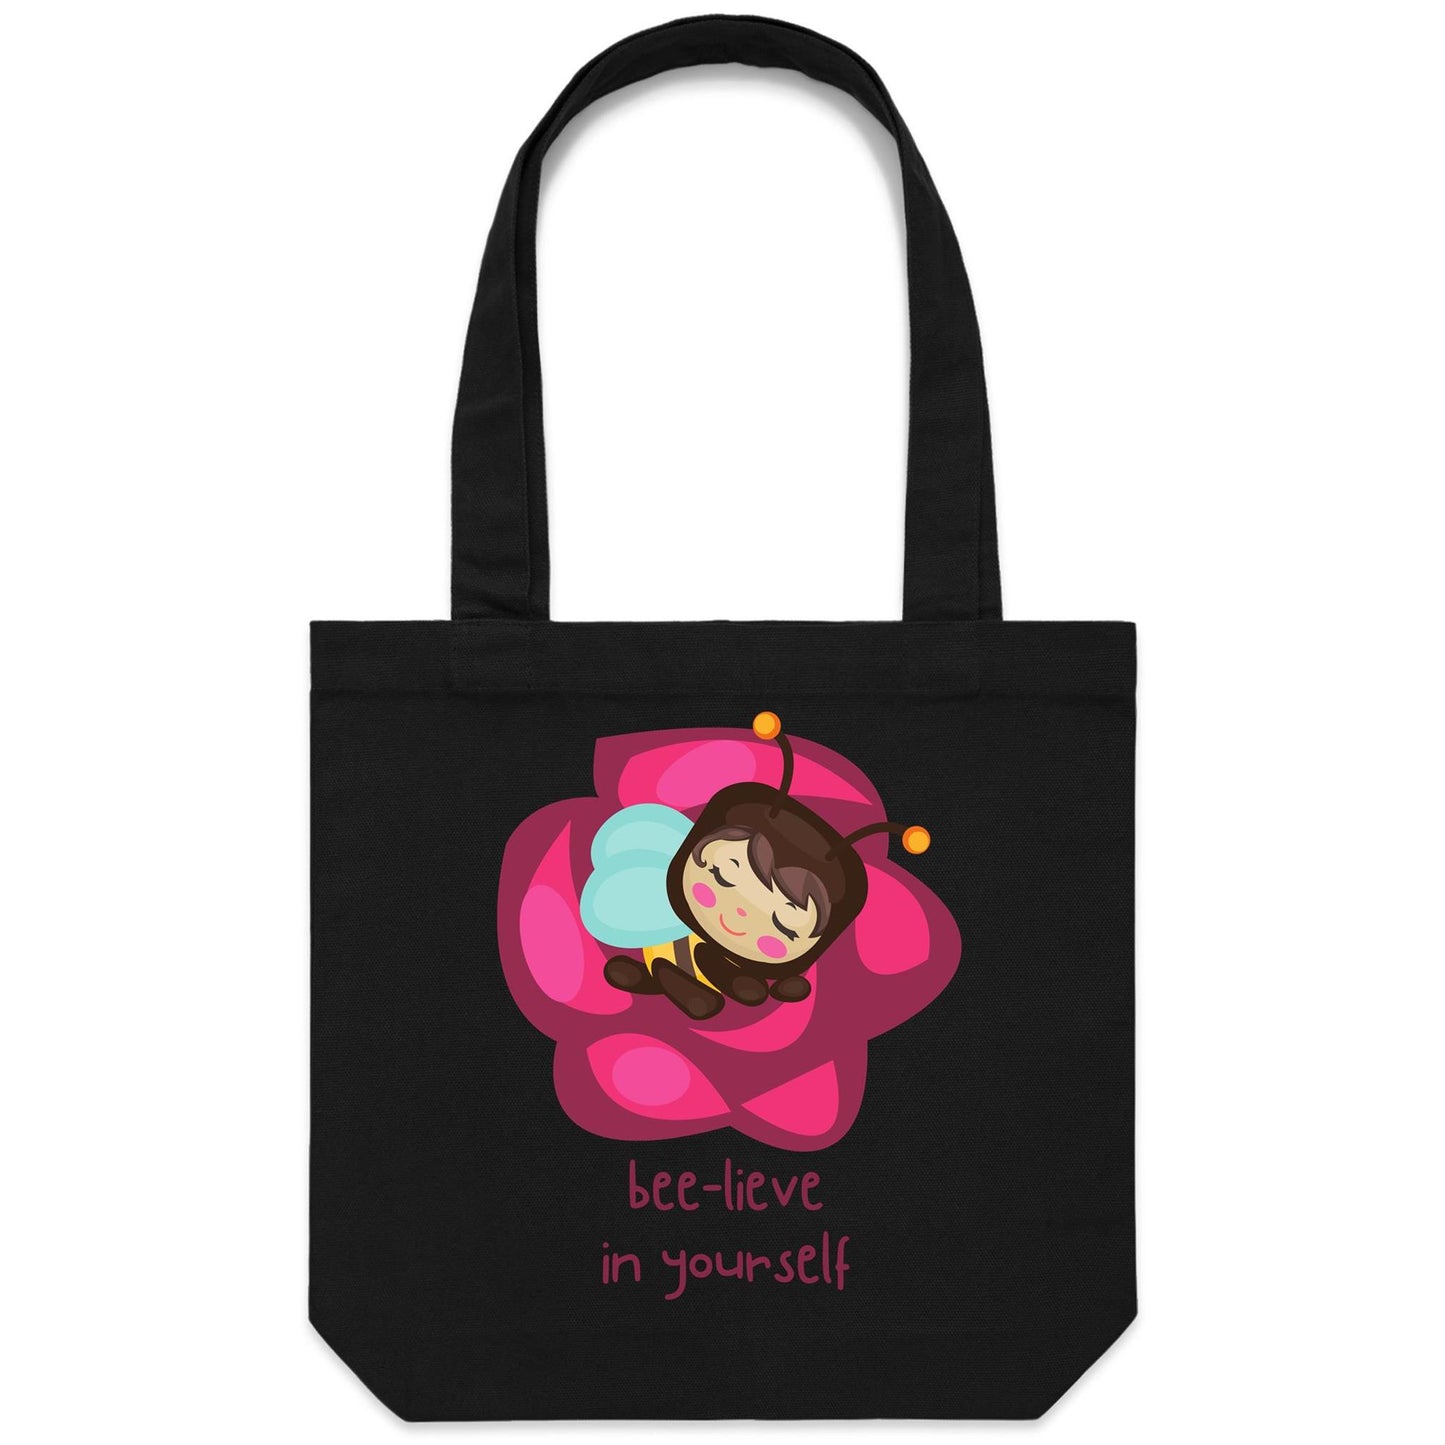 Bee-lieve In Yourself - Canvas Tote Bag Black One-Size Tote Bag animal kids